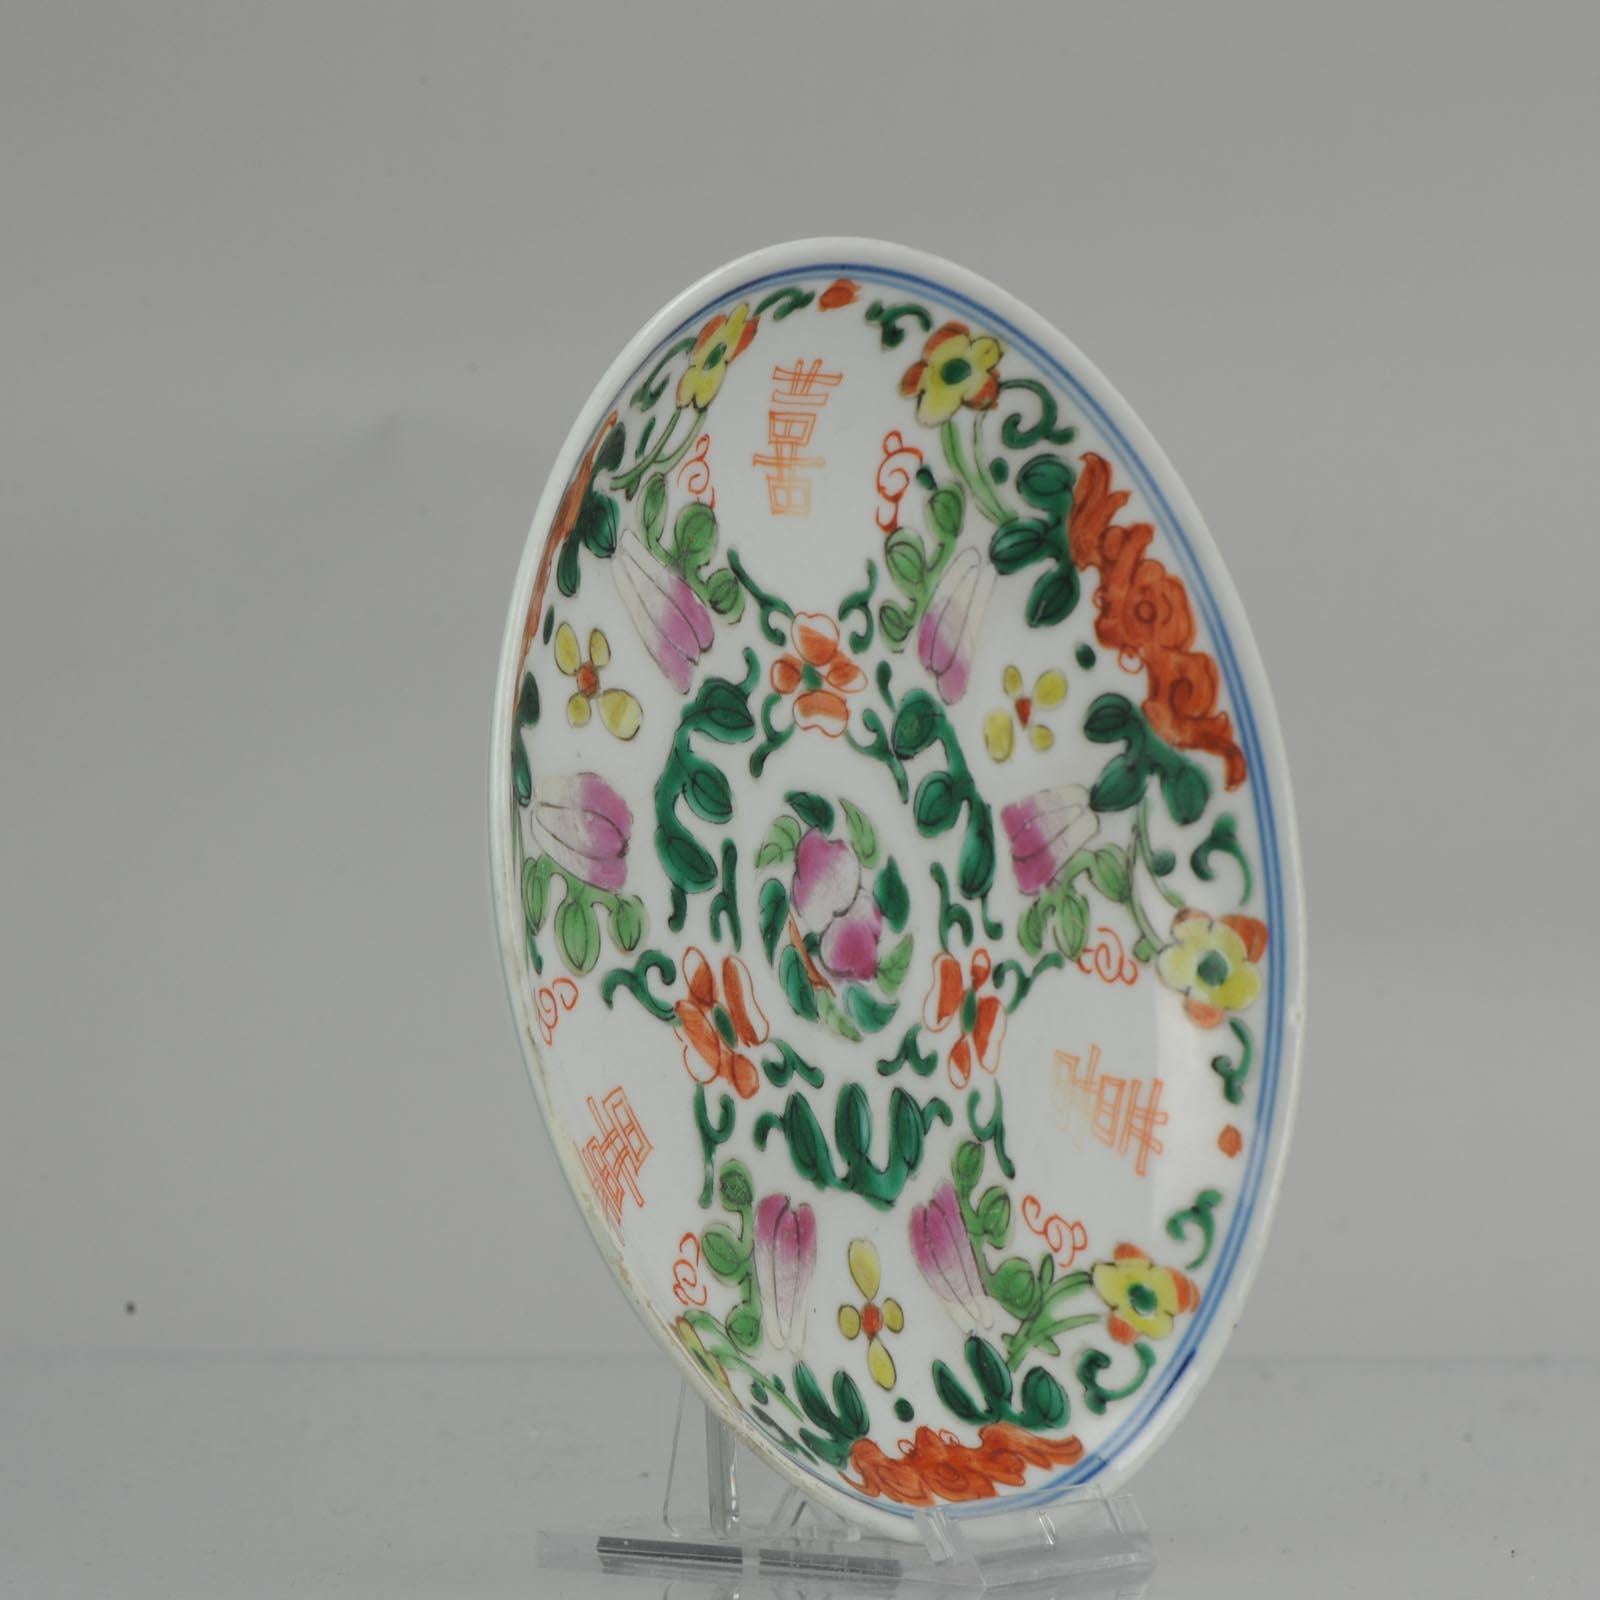 Antique Chinese Porcelain Kitchen Qing Famille Rose Plate China, 19th Century.

Lovely piece

Additional information:
Material: Porcelain & Pottery
Type: Plates
Region of Origin: China
Period: 19th century, 20th century Qing (1661 -